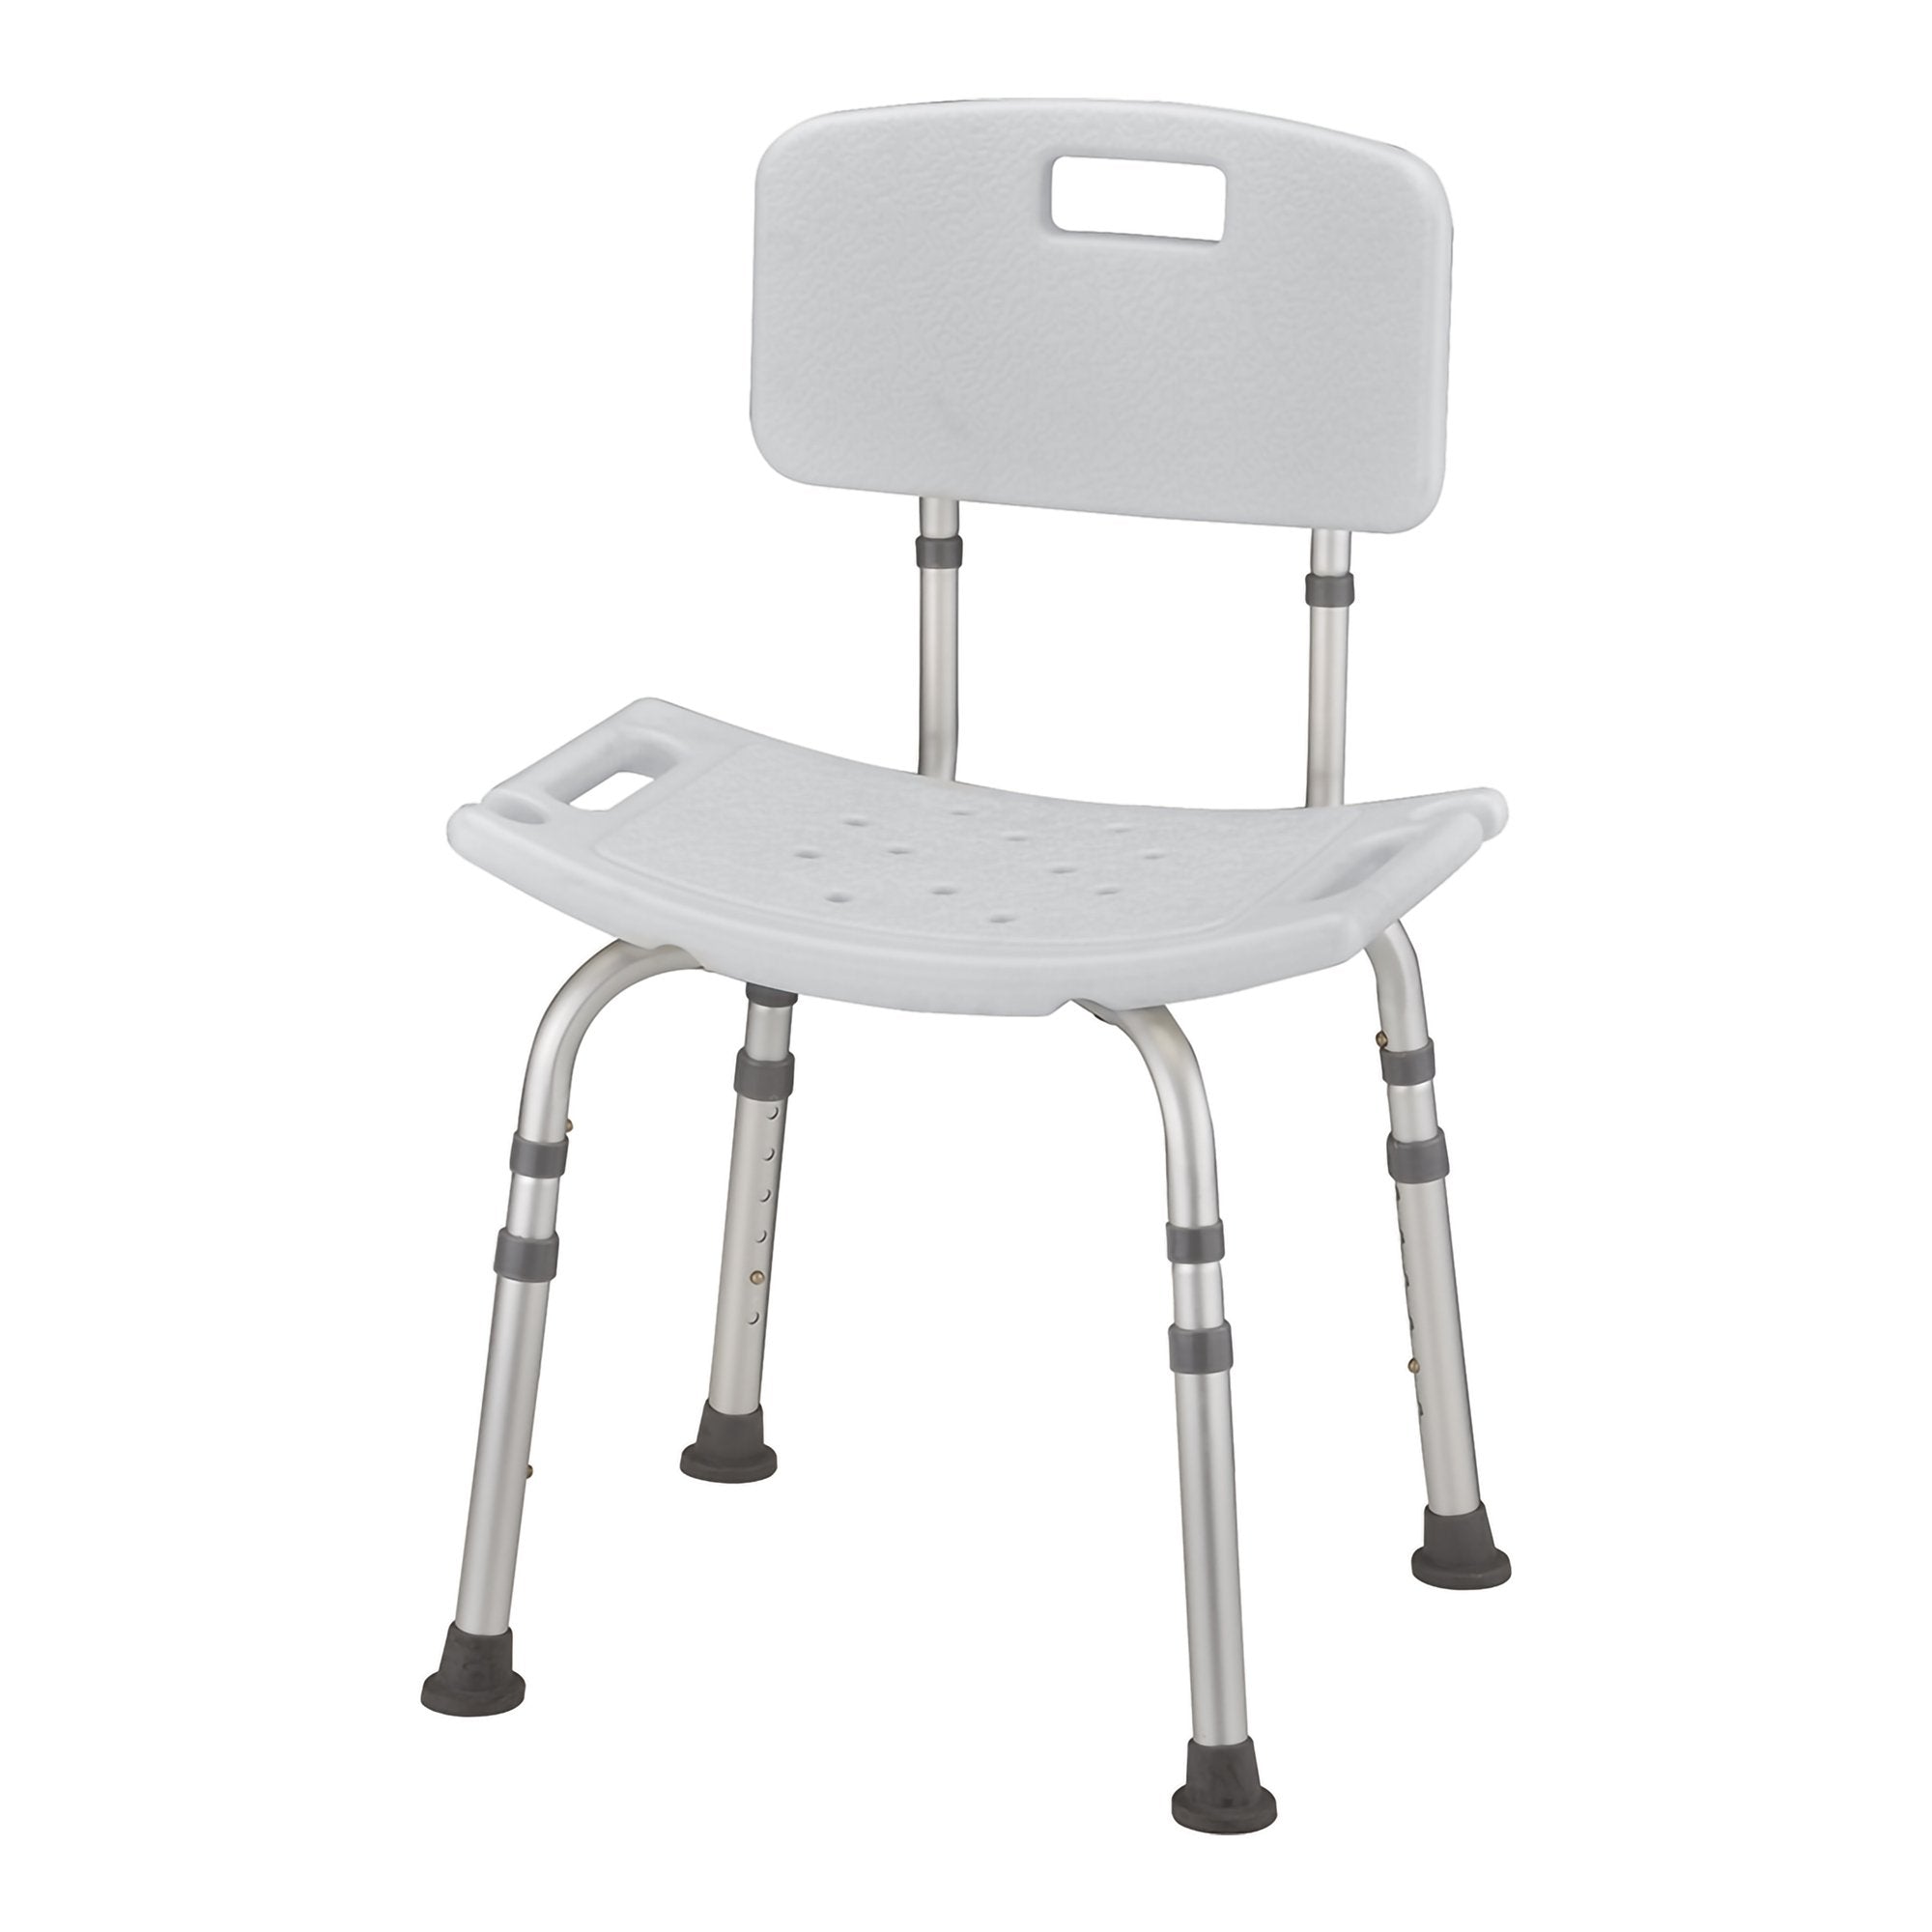 Shower Chair Without Arms Removable Backrest 20 Inch Seat Width 300 lbs. Weight Capacity